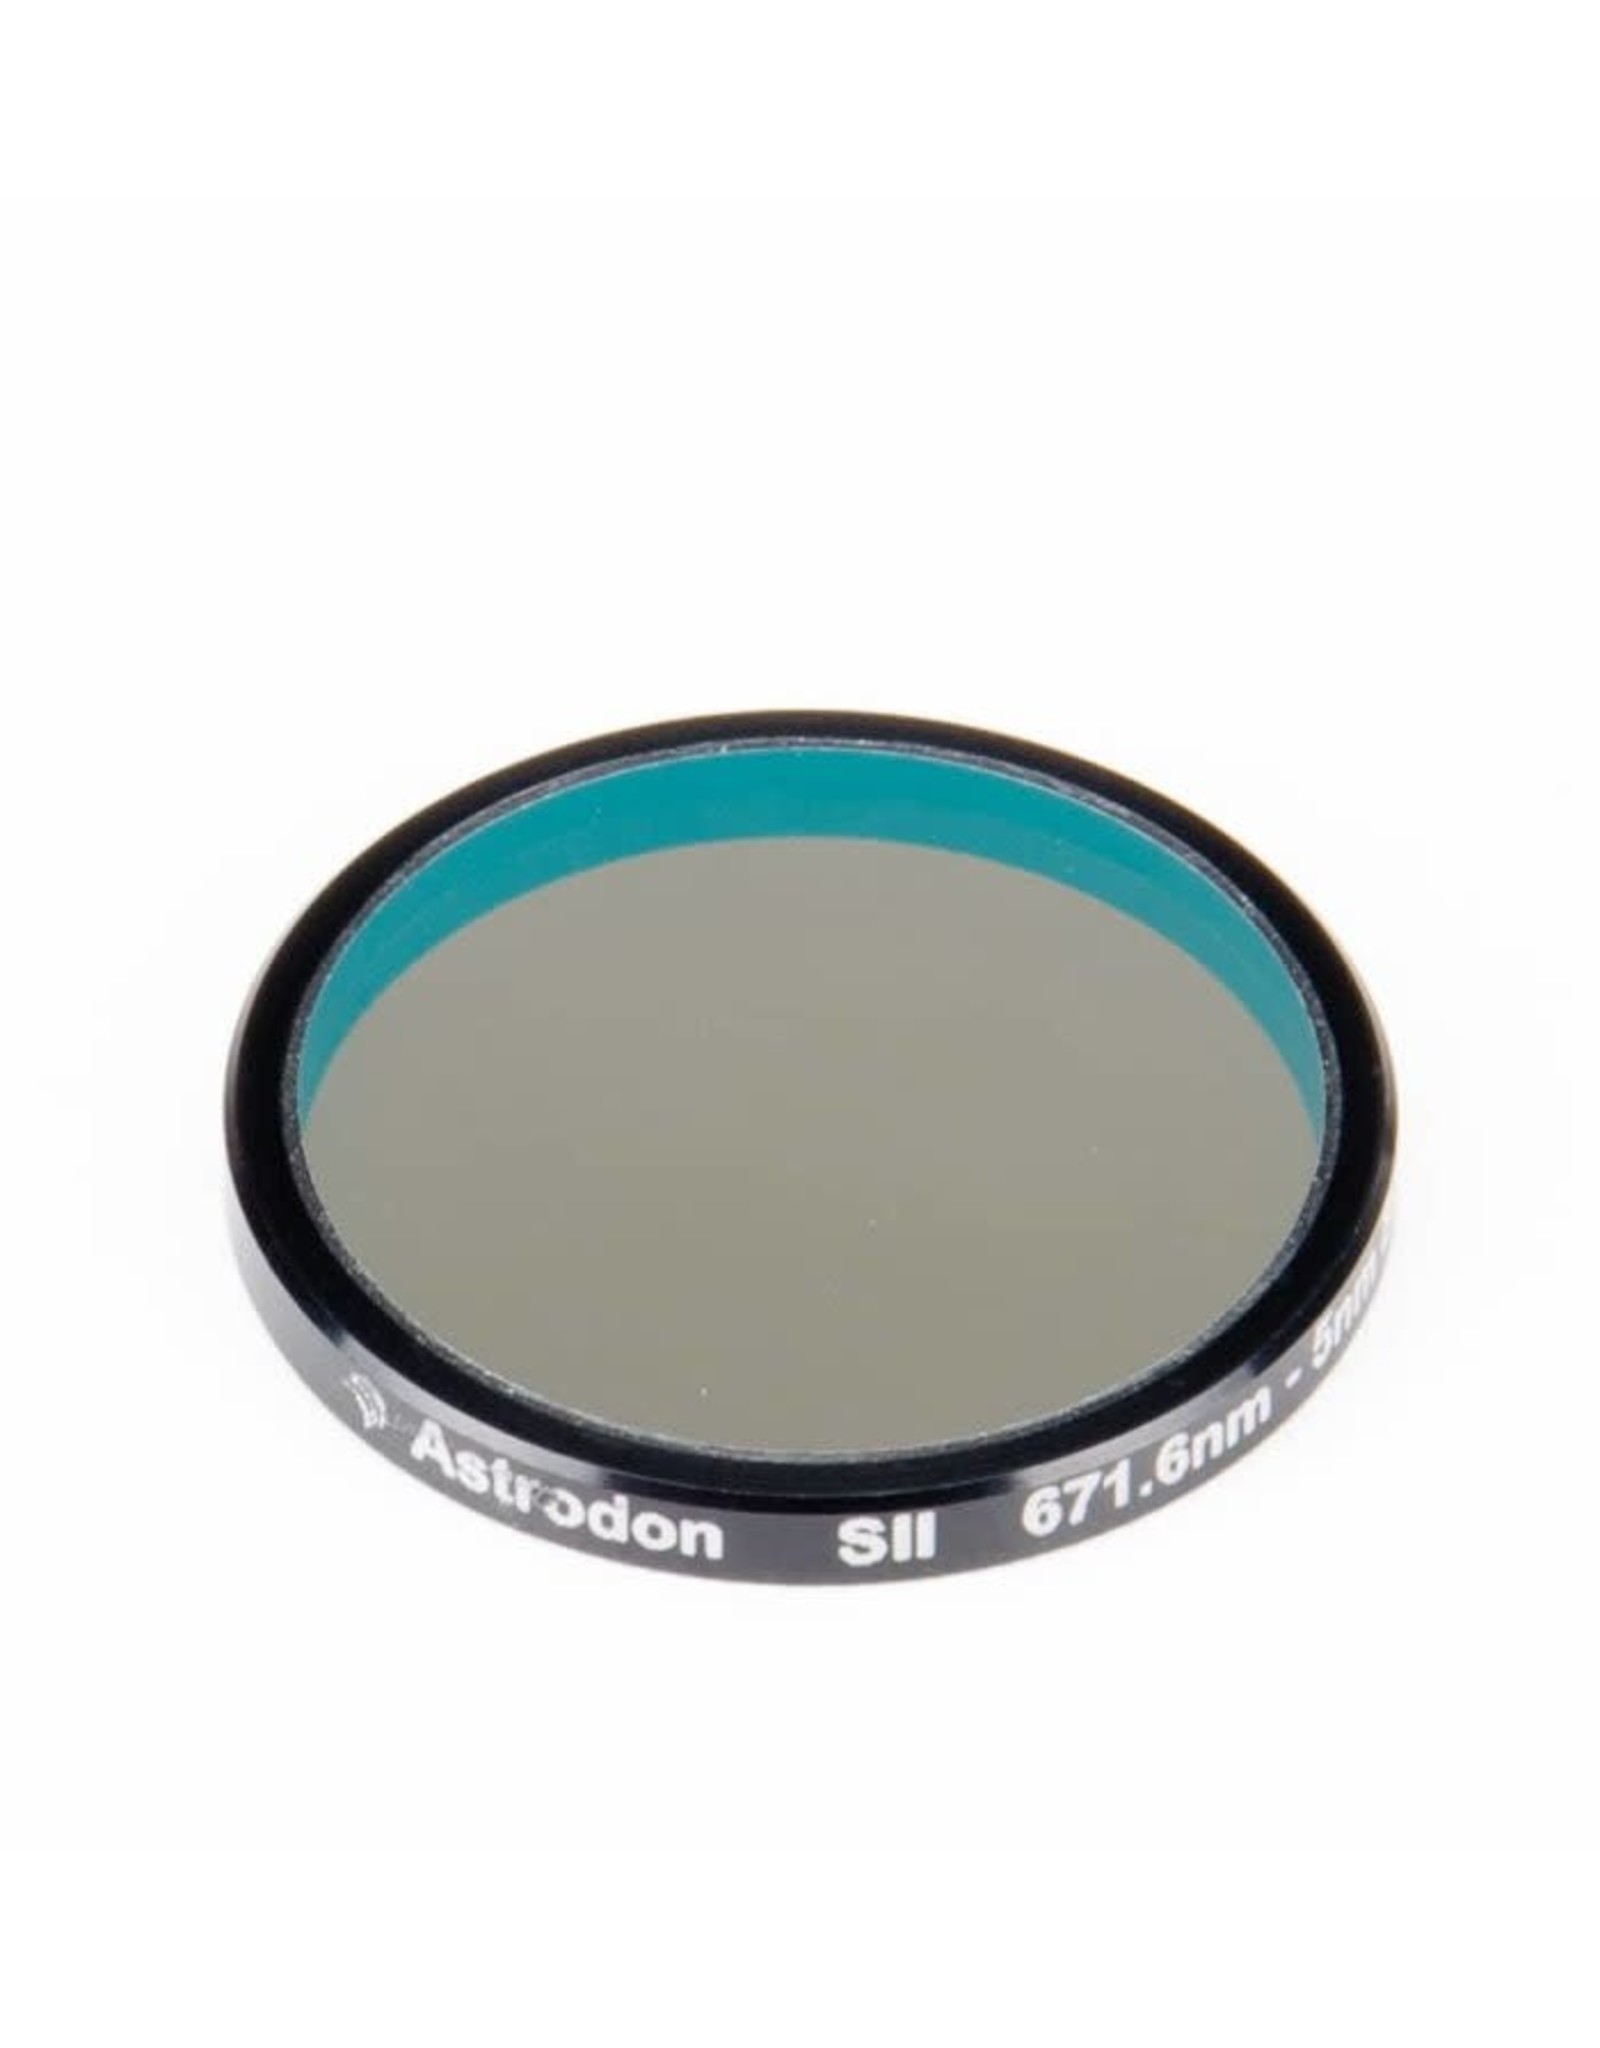 Astrodon Astrodon 5 nm Narrowband Filters – SII 5nm